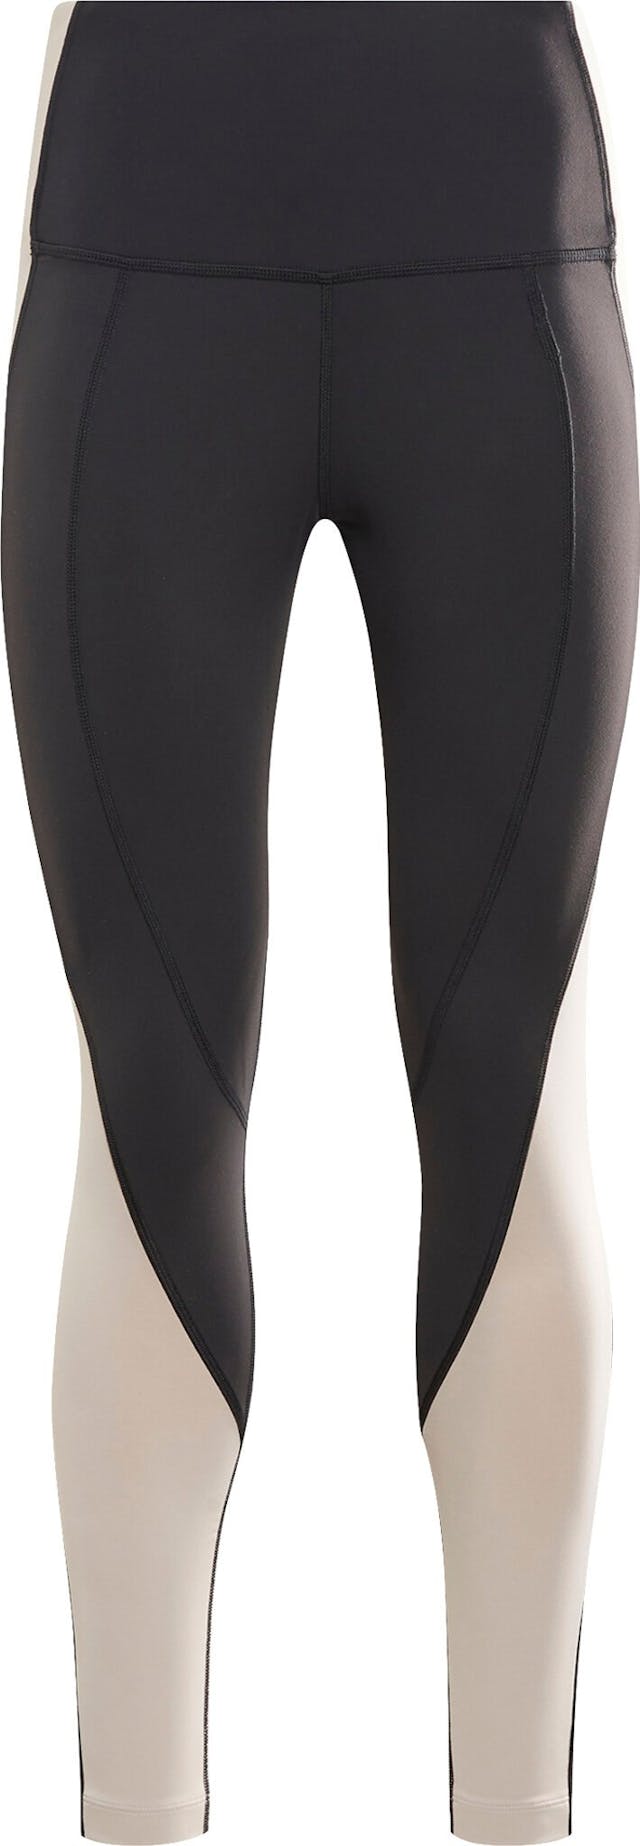 Product image for One Series Lux High-Rise Colorblock Leggings - Women's